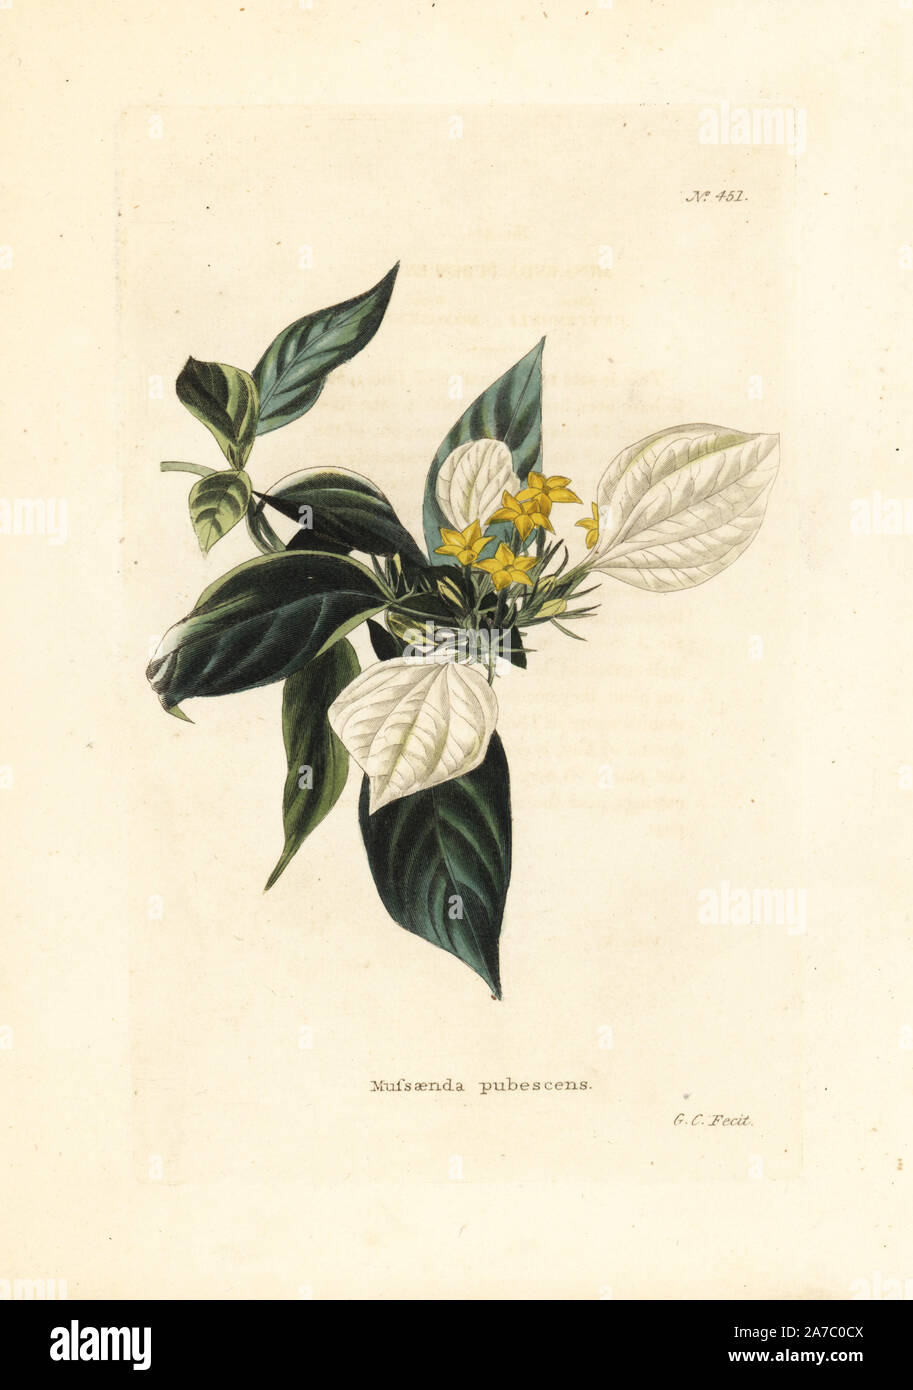 Buddha's lamp plant, Mussaenda pubescens. Handcoloured copperplate engraving by George Cooke from Conrad Loddiges' Botanical Cabinet, London, 1810. Stock Photo